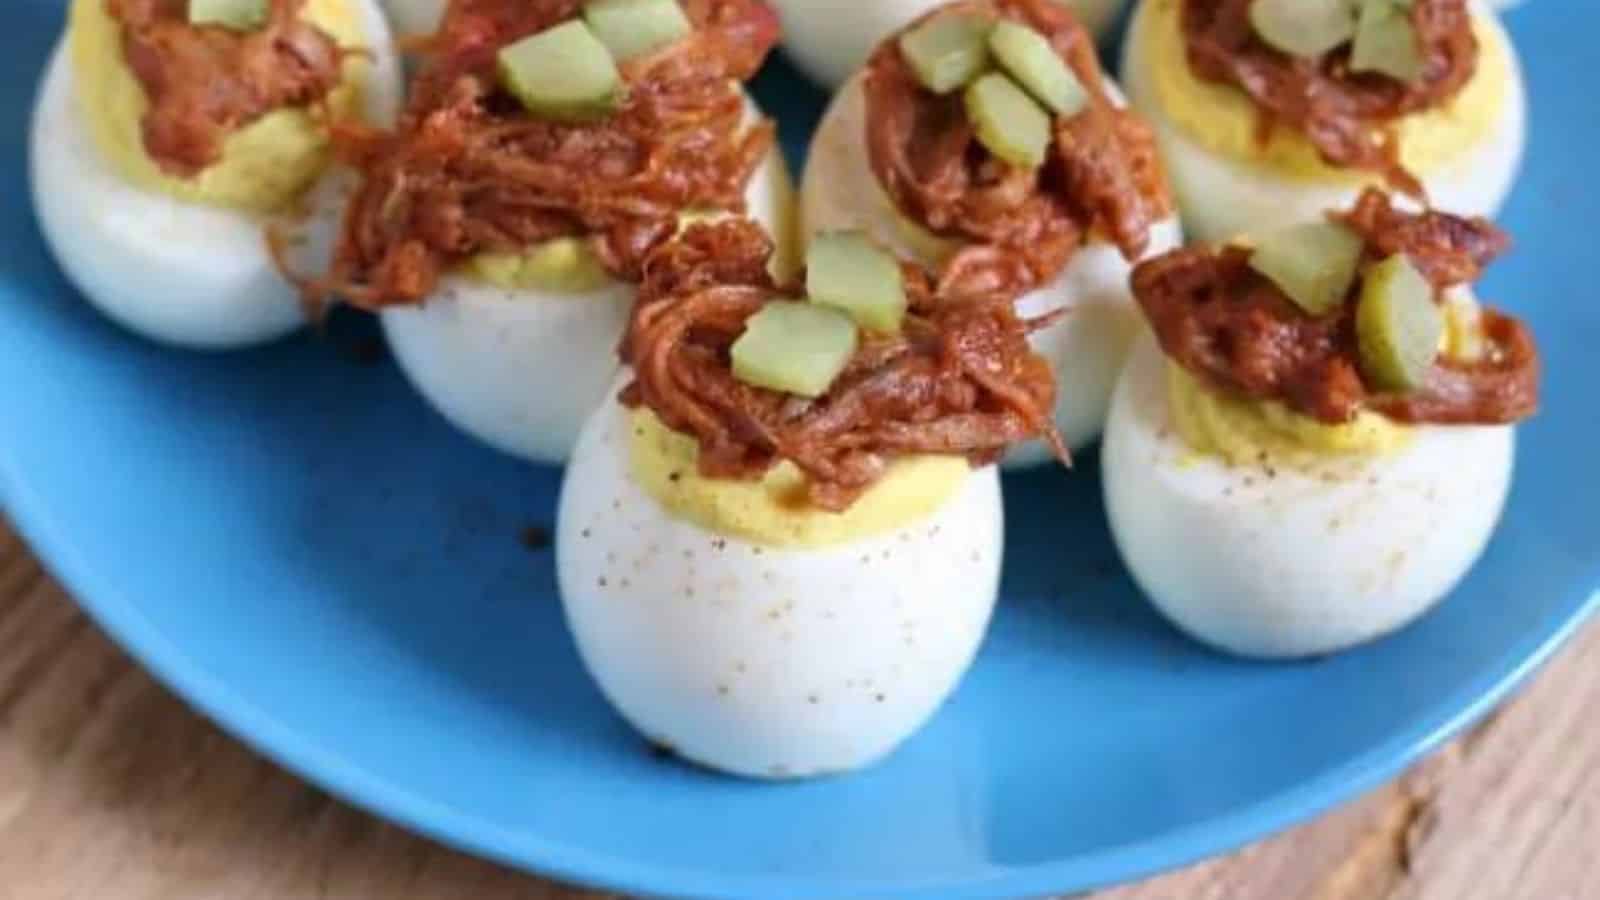 Blue plate with pulled pork deviled eggs, all topped with a pickle.